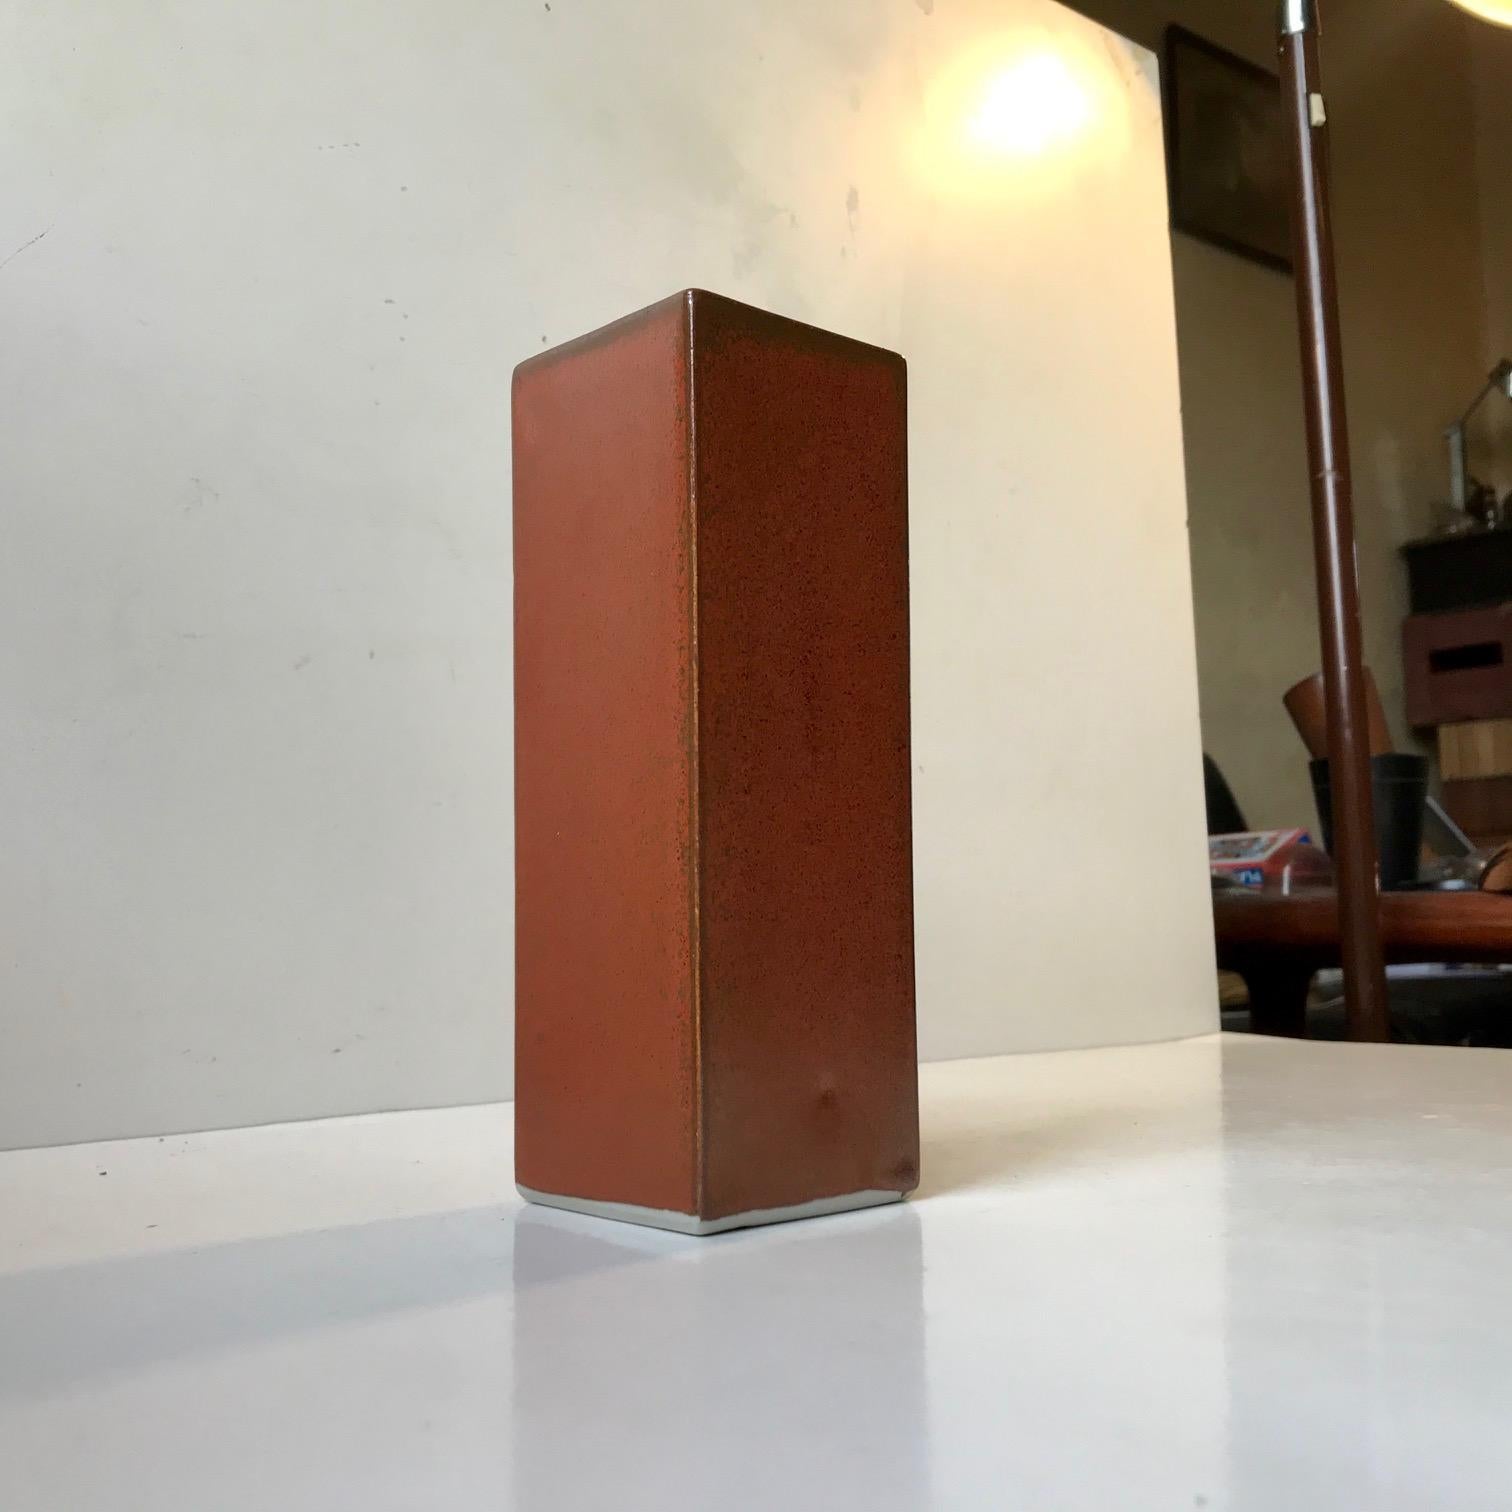 A rectangular Japanese Ikebana vase in orange with speckles in earthy brown/green glazes. Ikebana is the Japanese equivalent of arranging flowers. The vase has a label from Yamasan to the base and was made during the 1970s. The vase is intact and